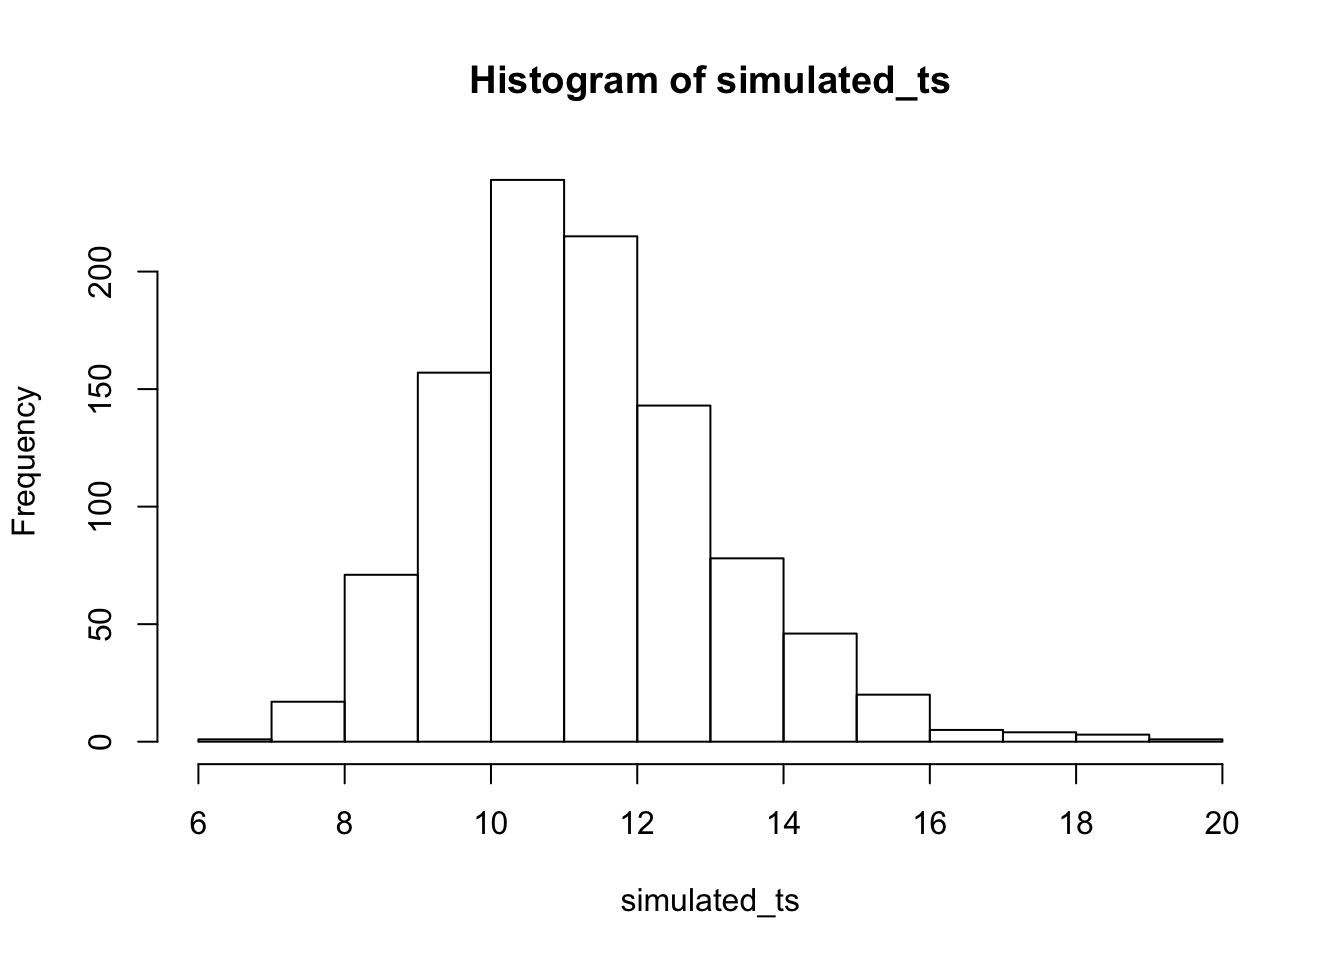 Simulating ts in R